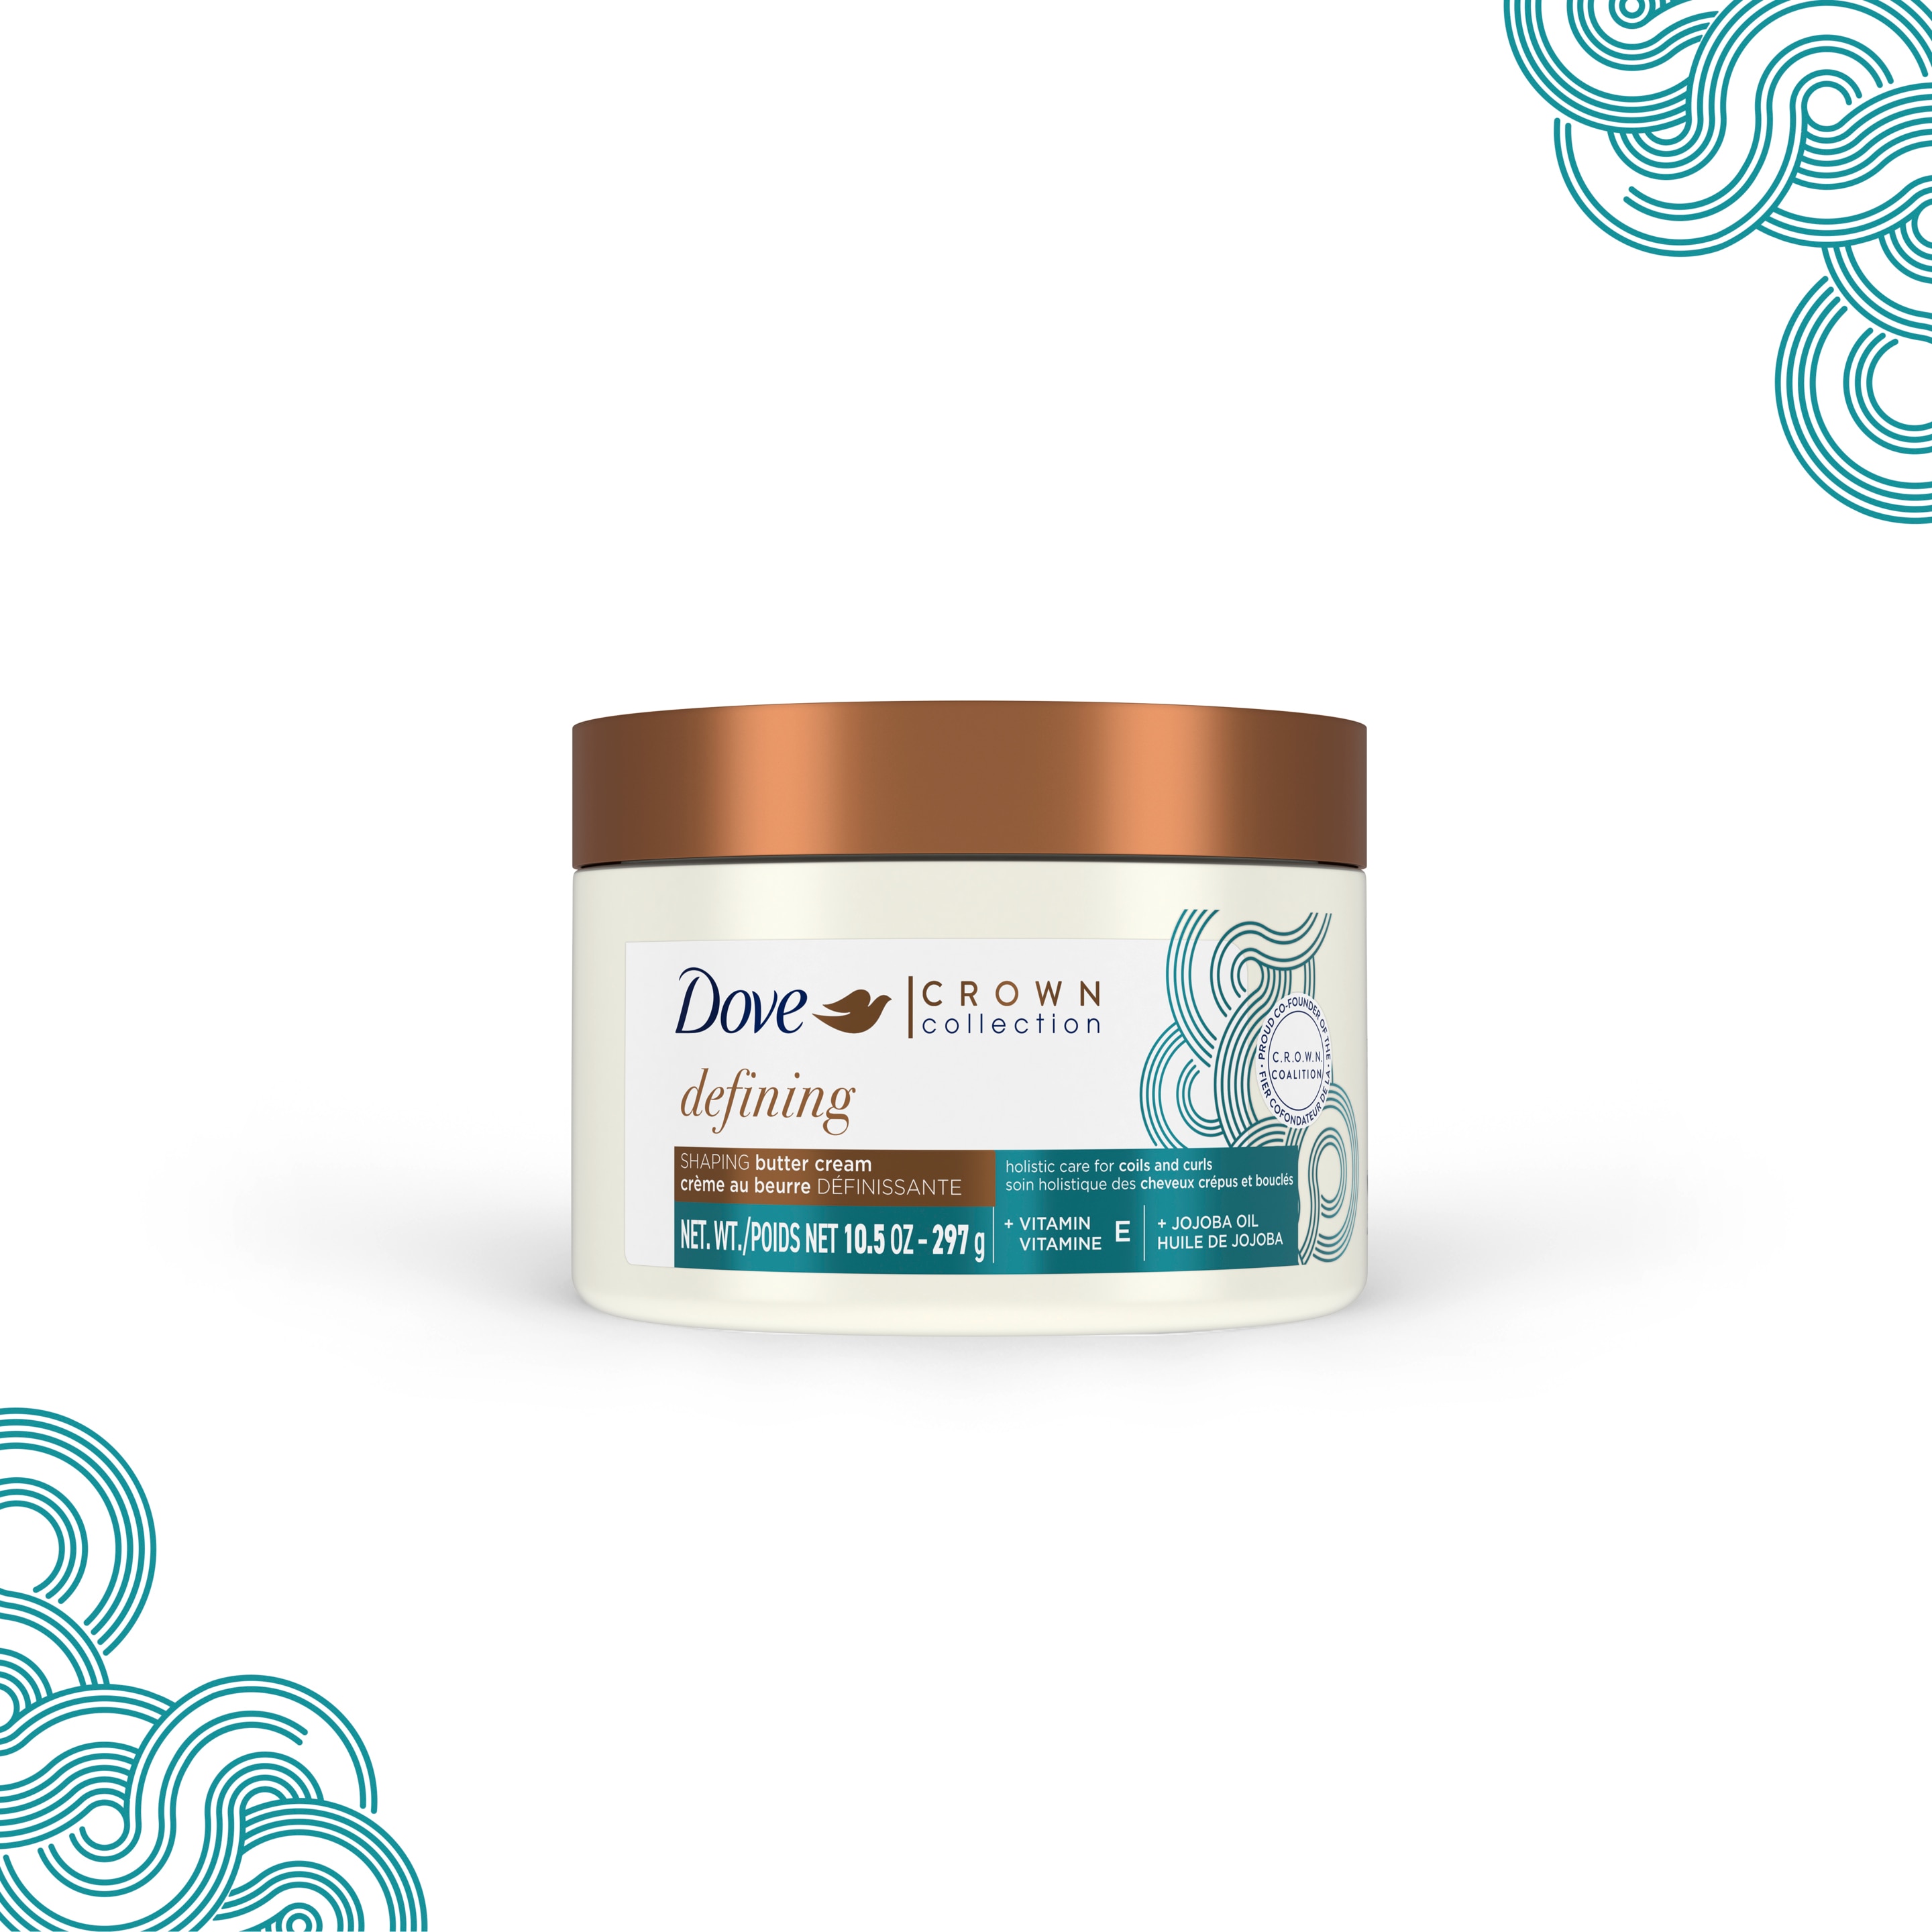 Dove Crown Collection Defining Shaping Butter Cream